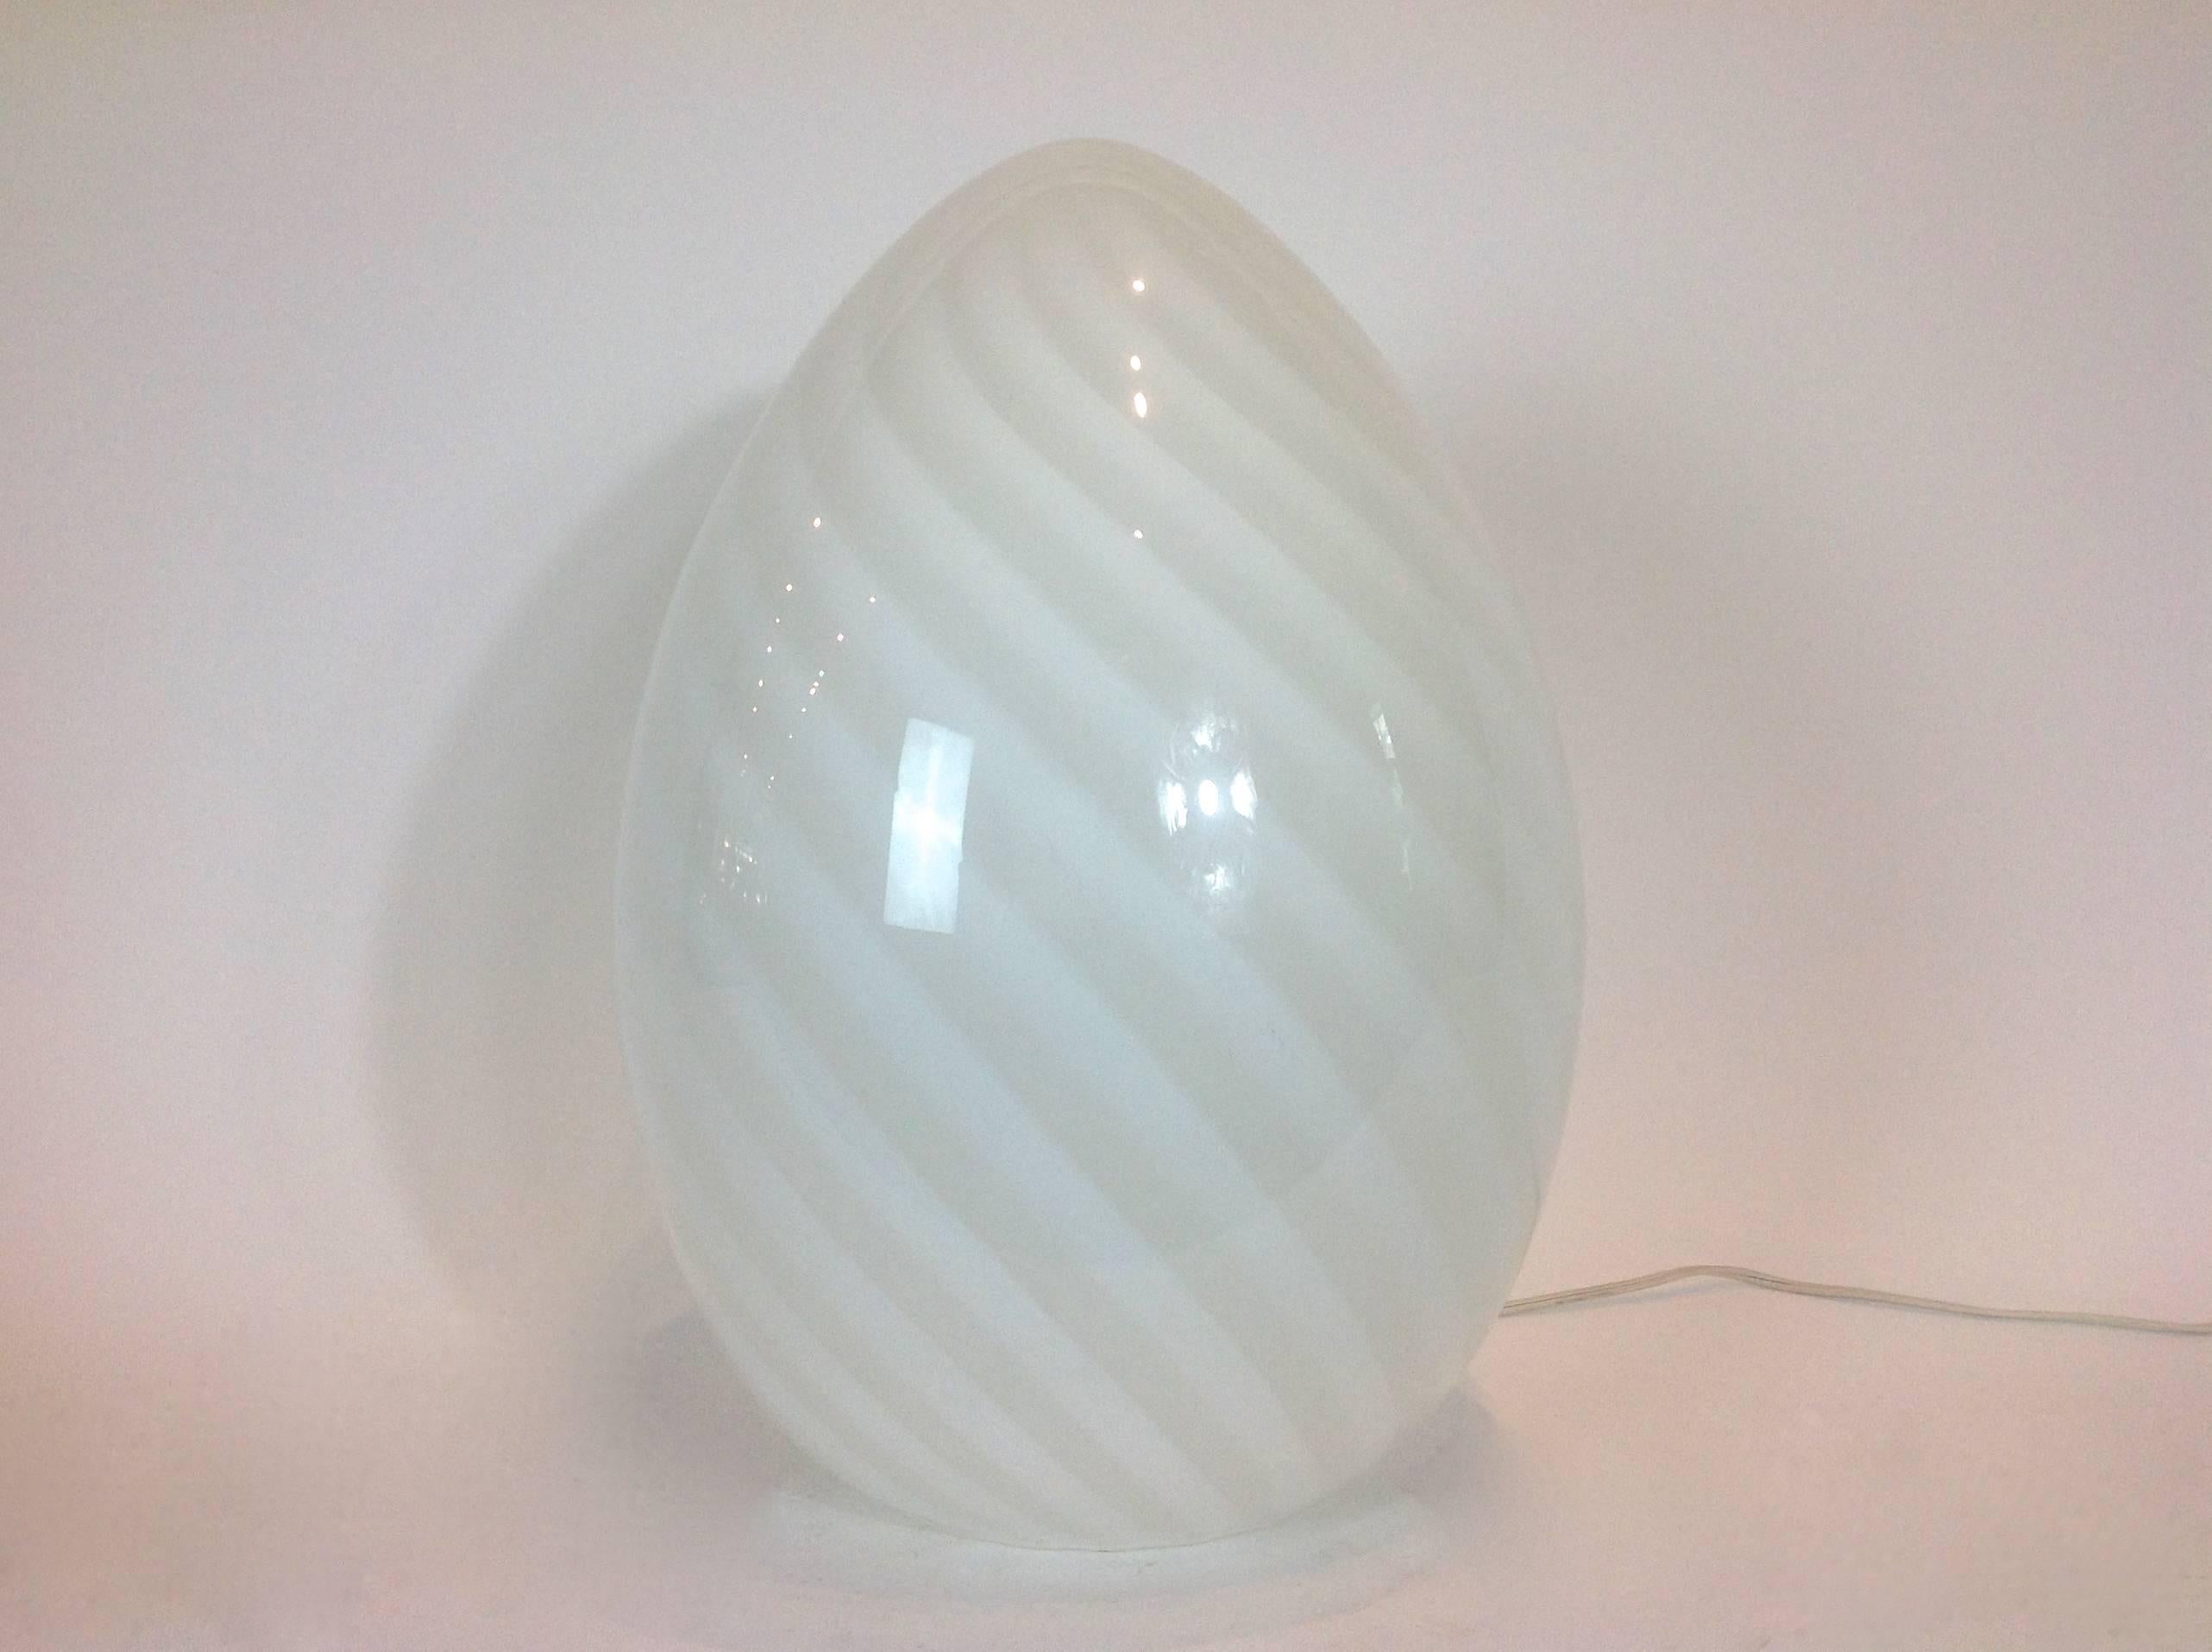 Fantastic all-glass handblown egg lamp with swirl pattern. Beautiful ambient light glowing from within.